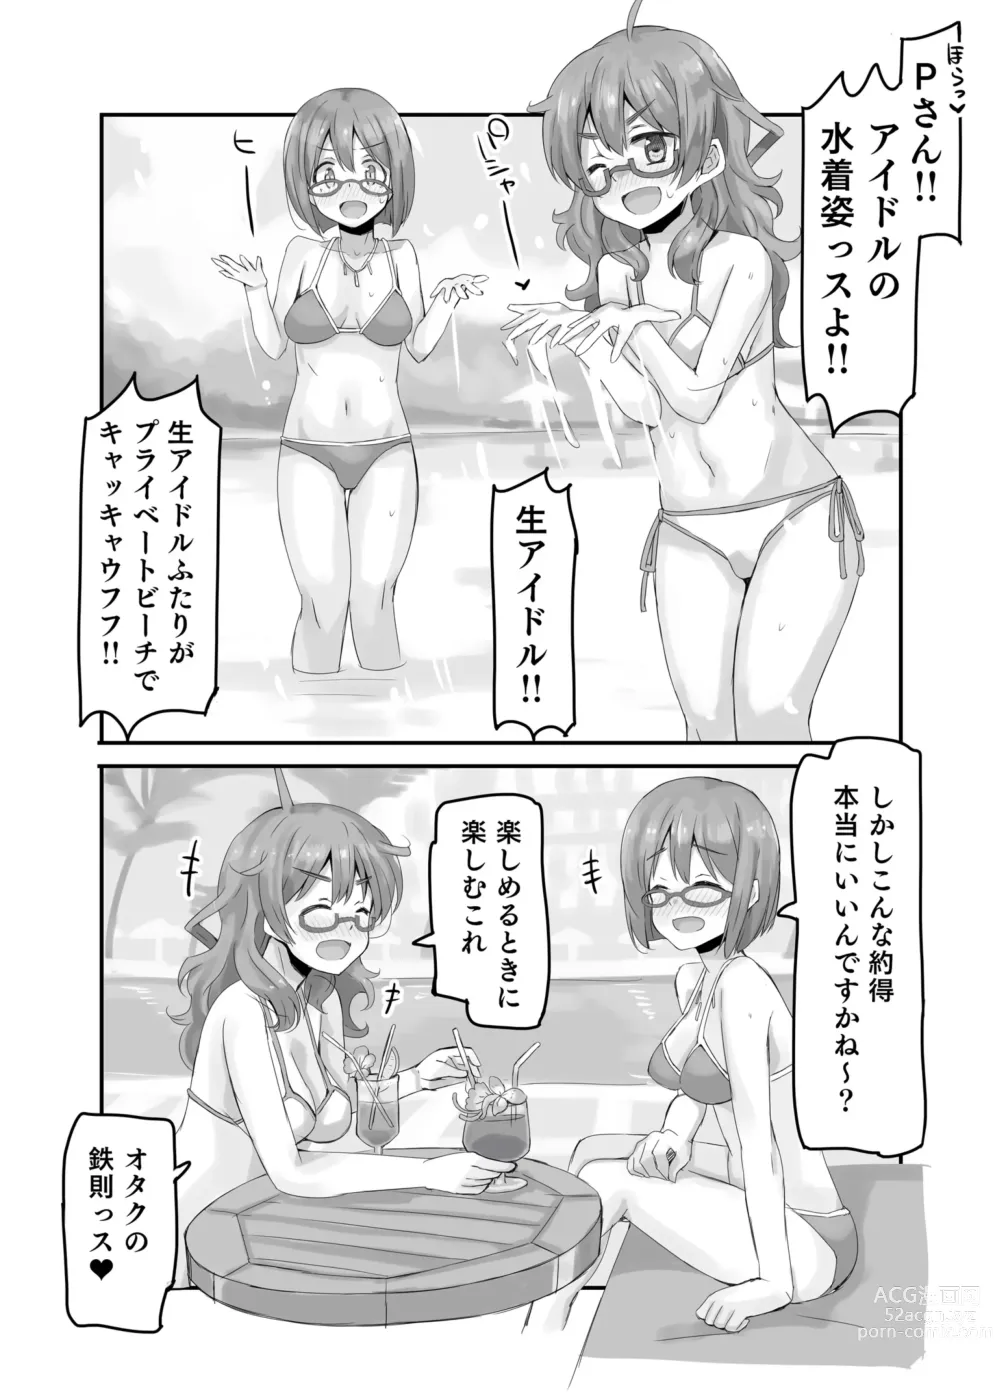 Page 5 of doujinshi HINA RESORT MIX! - Its a story about two idols going wild and eating producers at a resort.